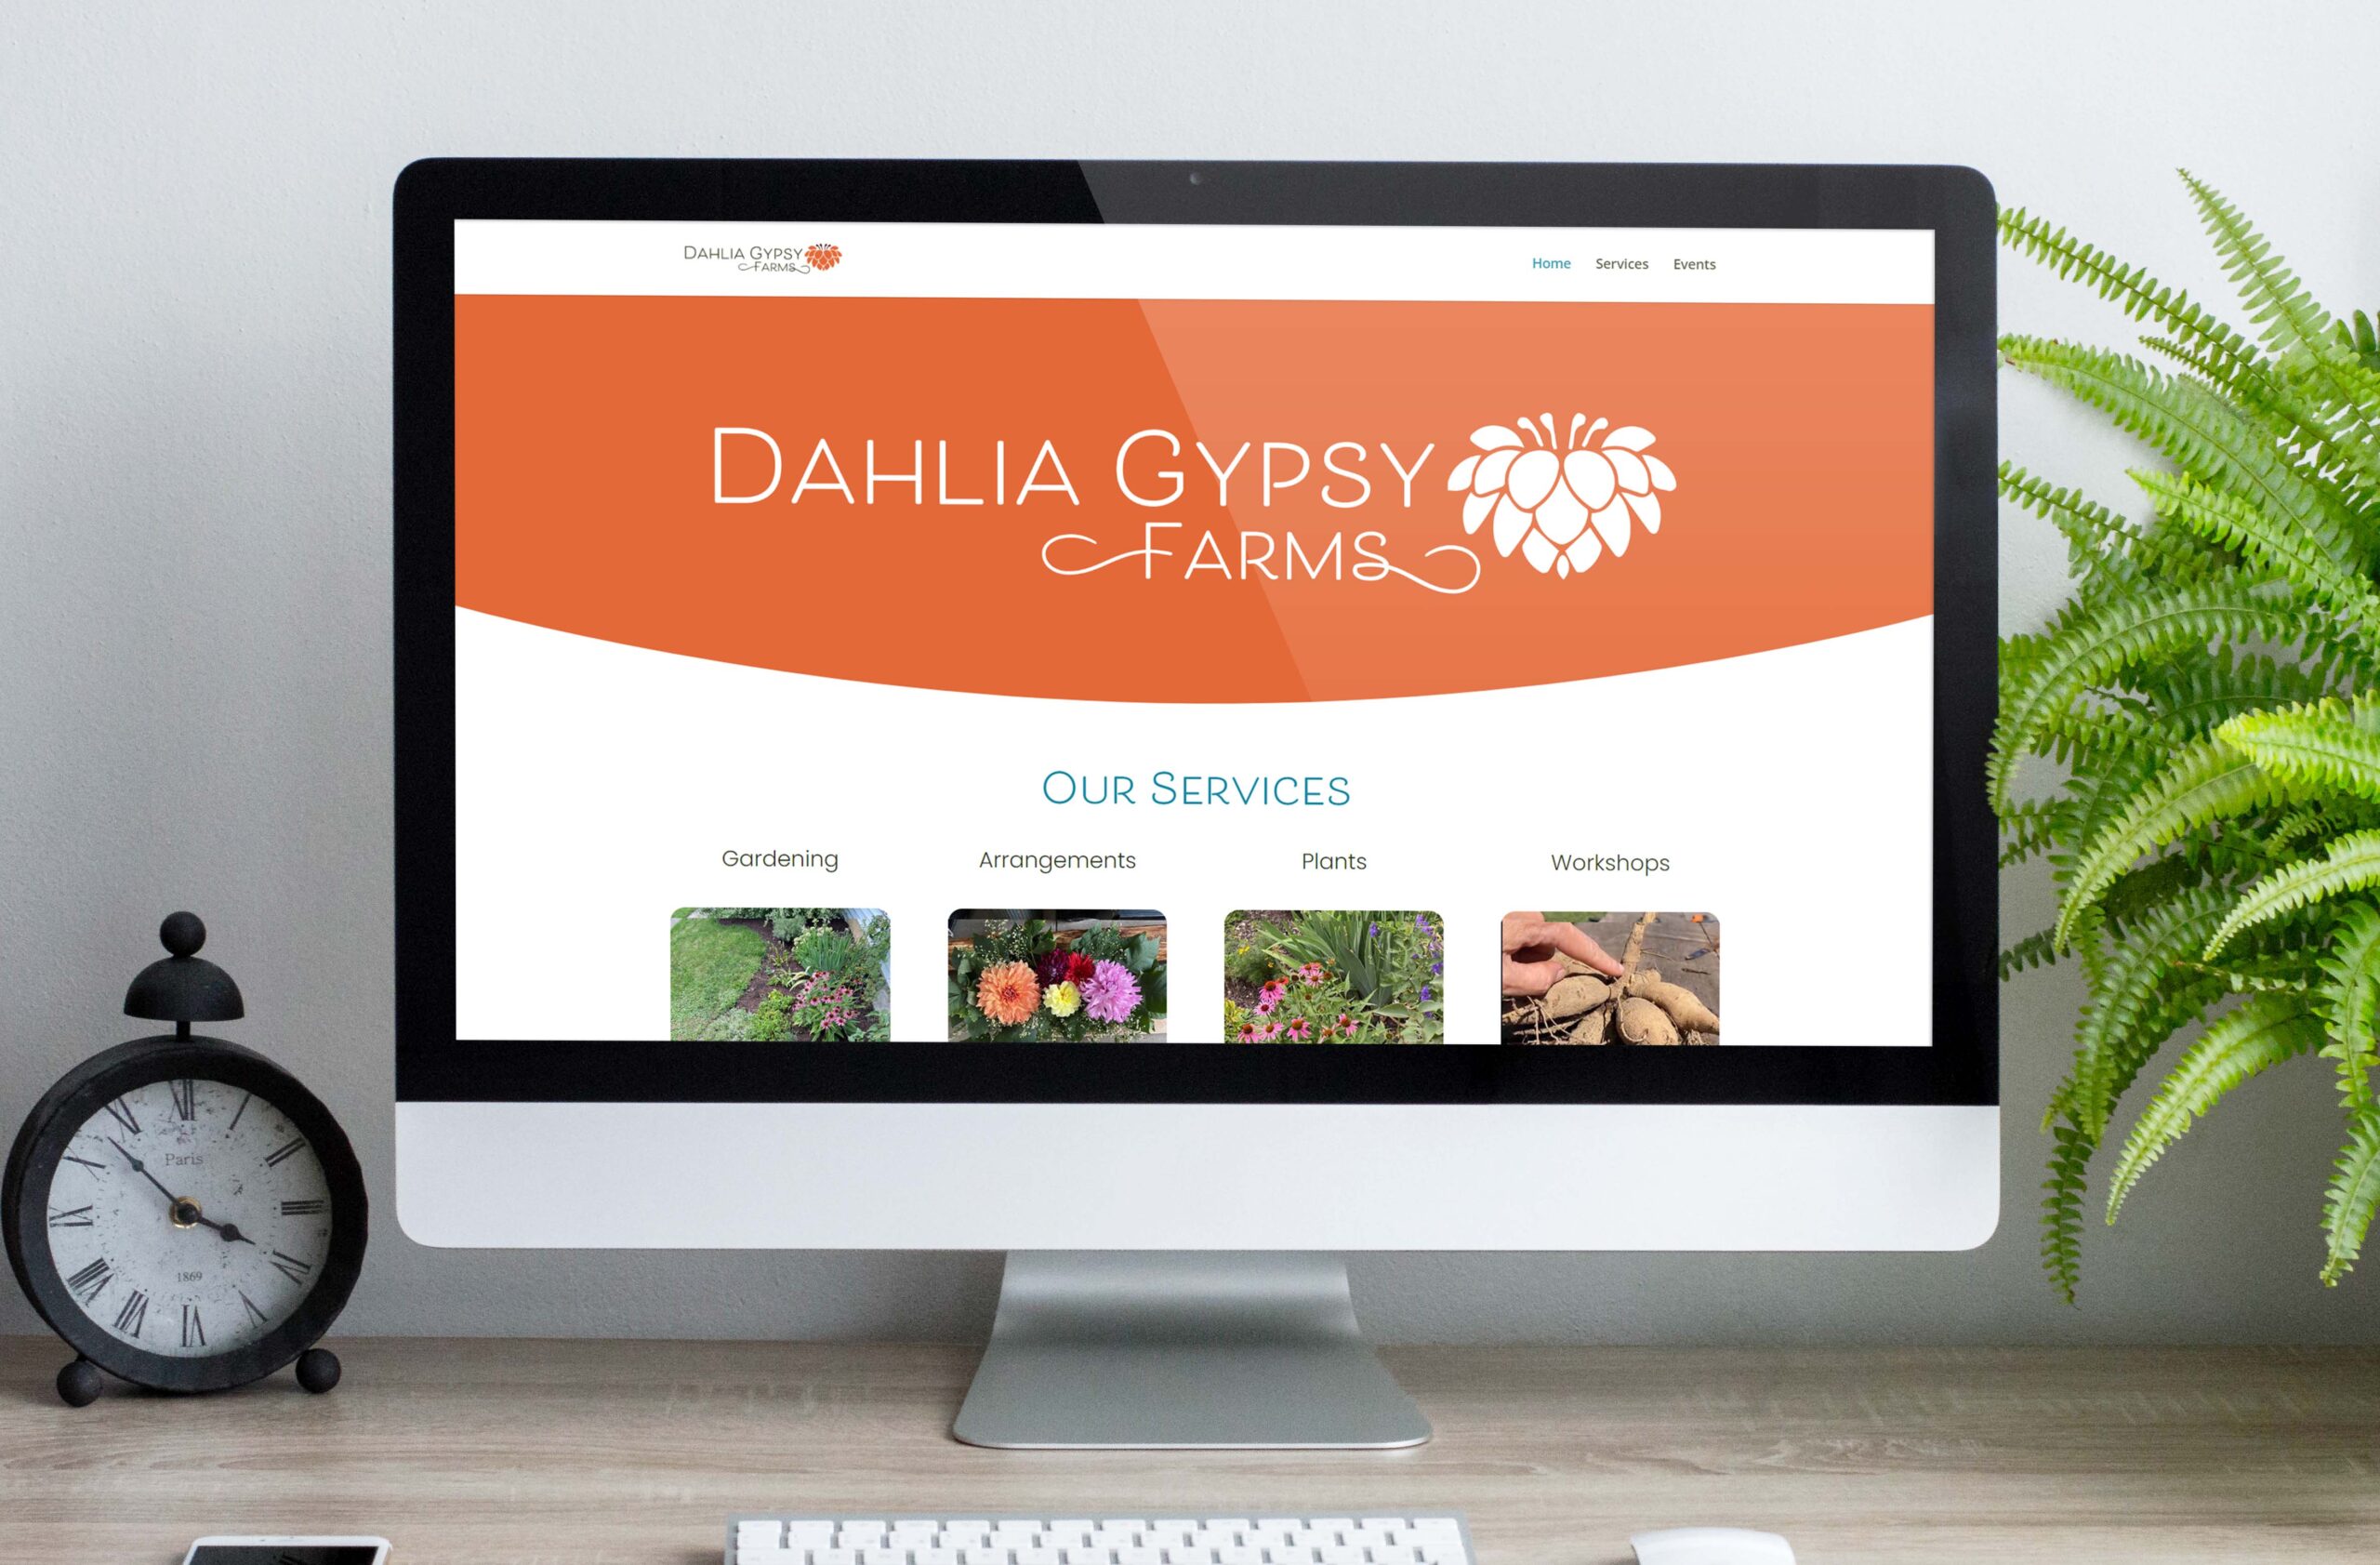 Dahlia Gypsy Farms home paged mocked up on a desktop screen.